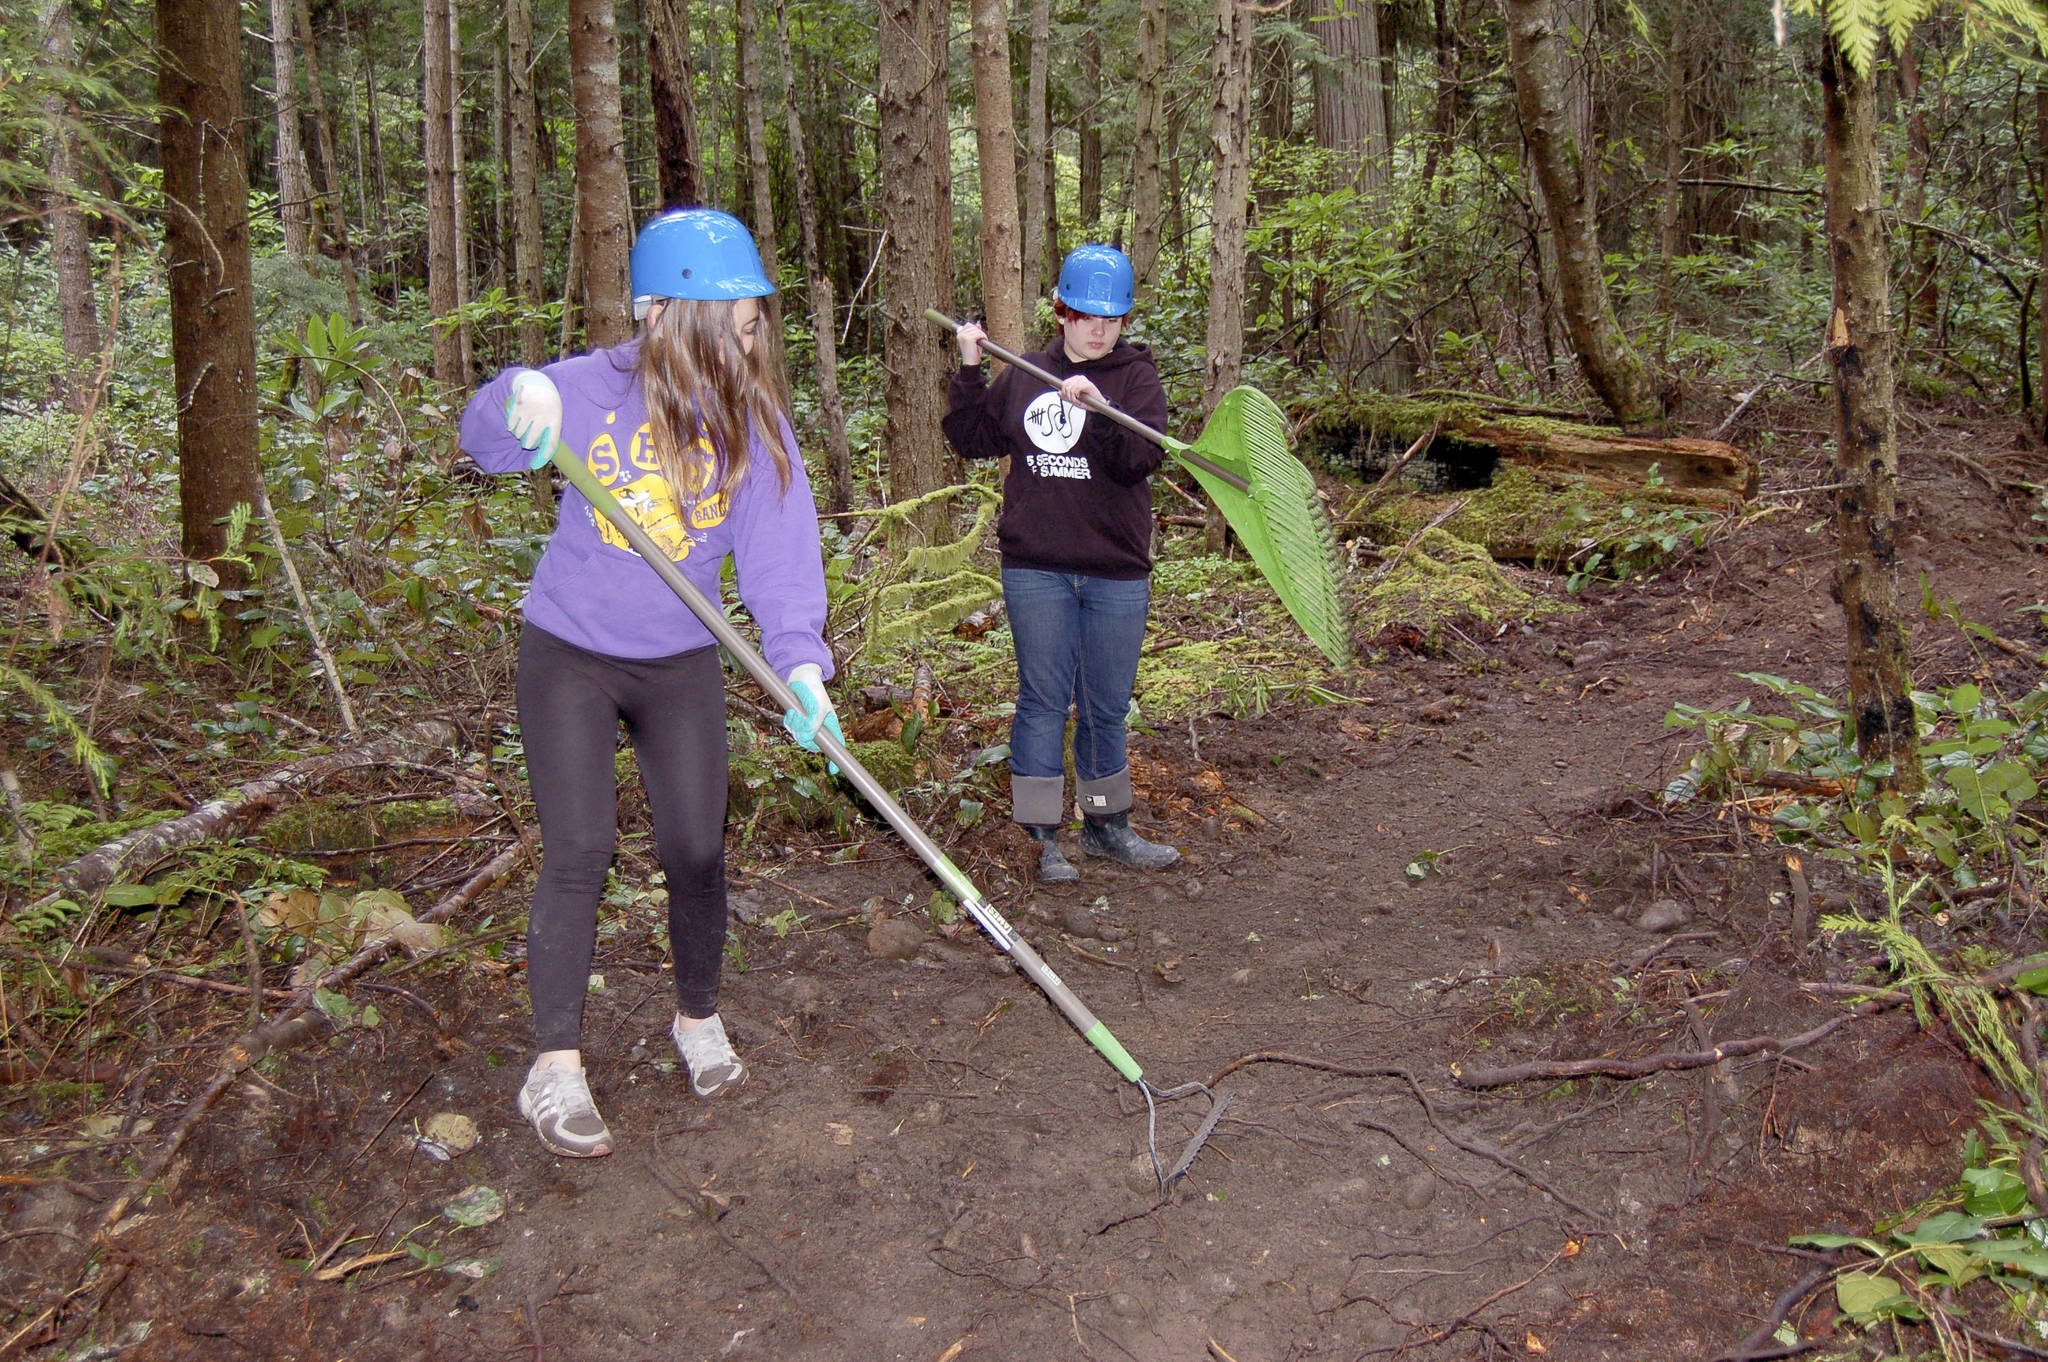 Sequim High freshmen Kjirstin Foresman, left, and Mazie Whitteker, use rakes to clear debris from a new trail they and other high-schoolers worked to build on the Miller Peninsula last week. They learned about sharing the trail with bicyclists and stock, careers in forestry management and different tools for clearing trails. (Matthew Nash/Olympic Peninsula News Group)